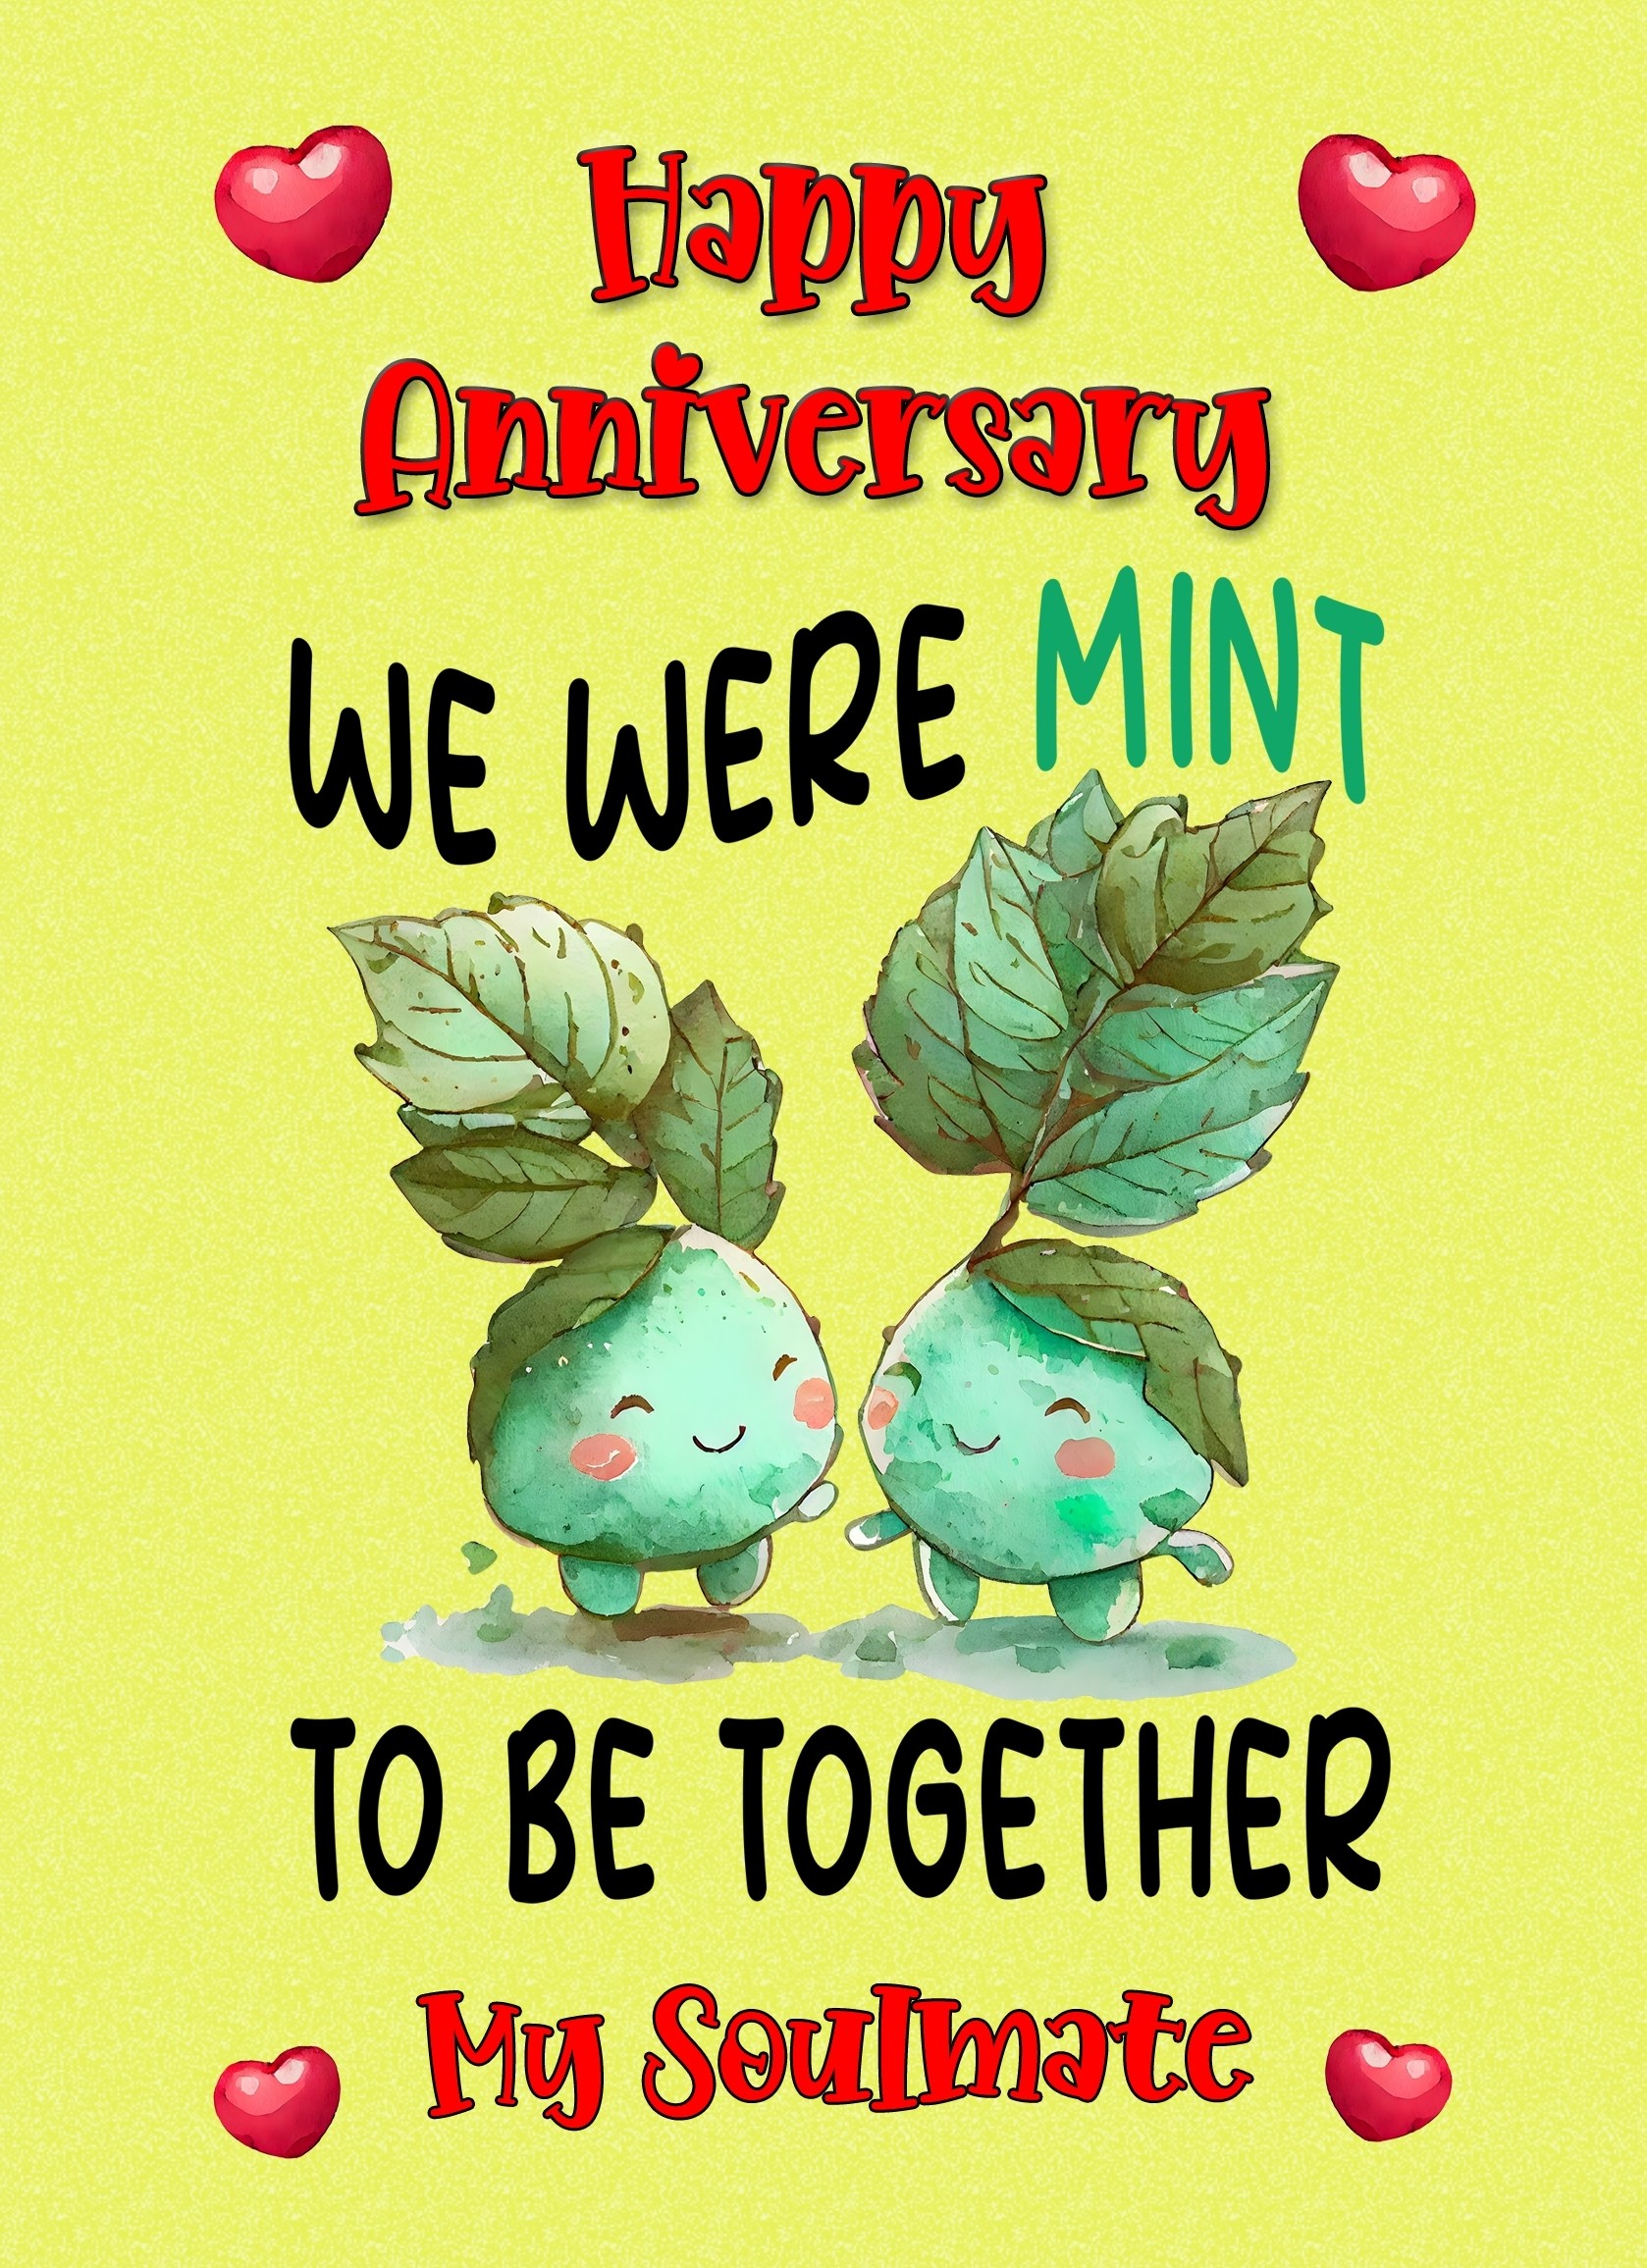 Funny Pun Romantic Anniversary Card for Soulmate (Mint to Be)